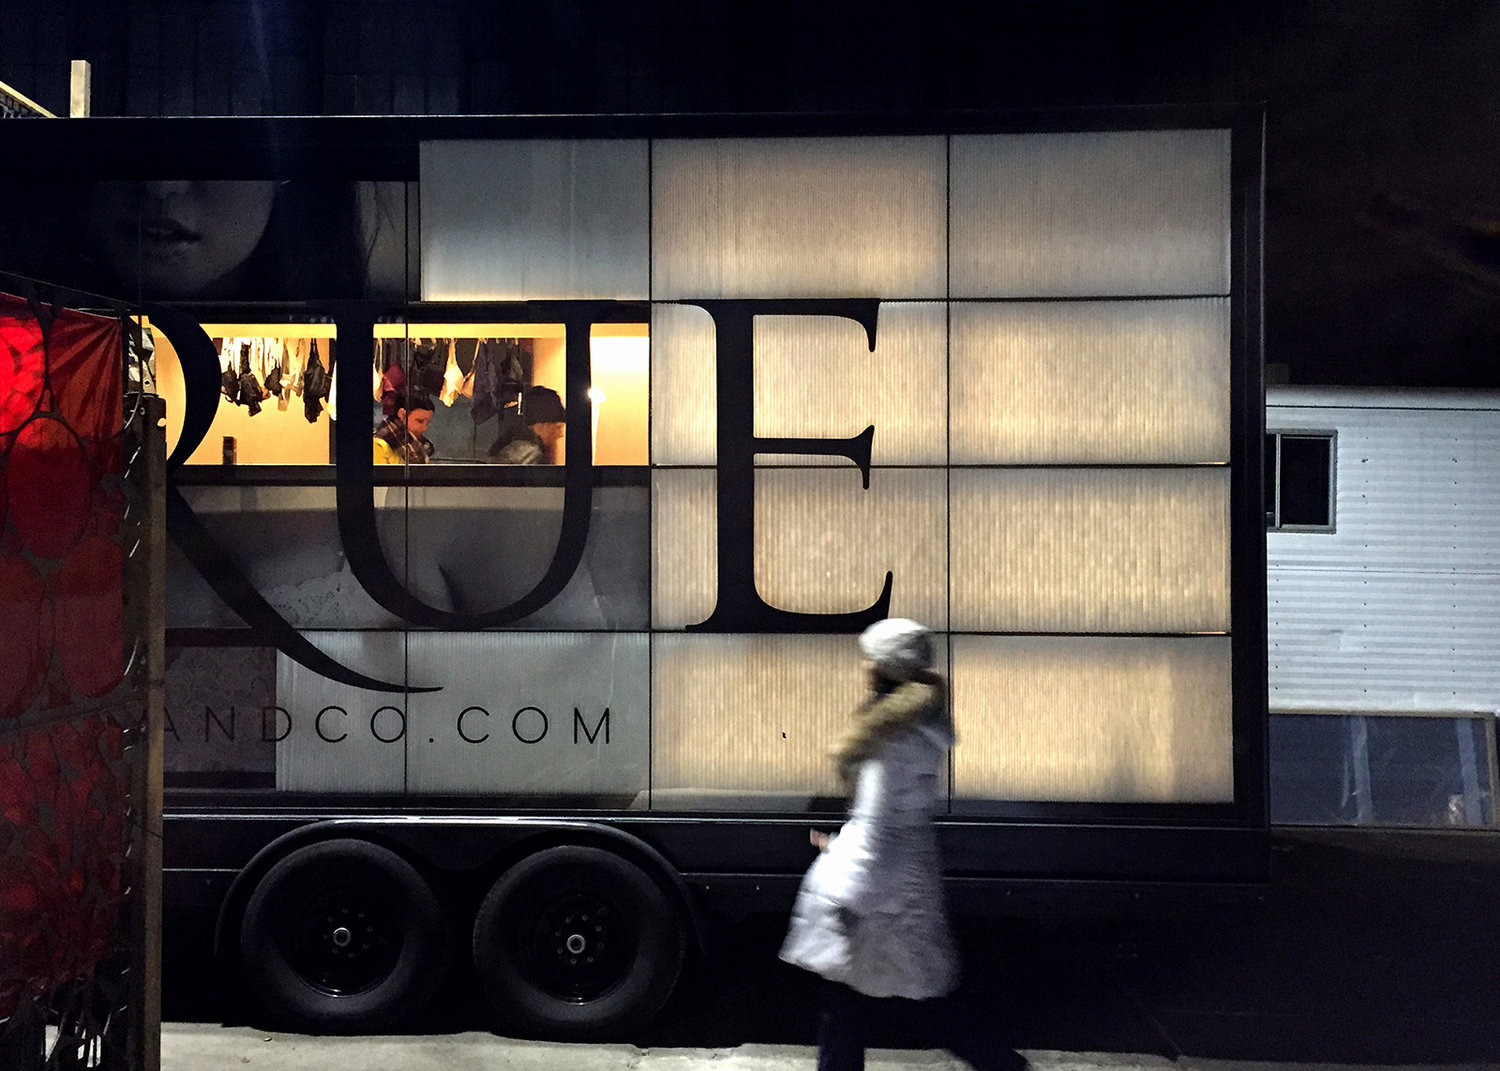 True & co. Mobile lingerie shop by saw and MOA will Travel across the us. True cos